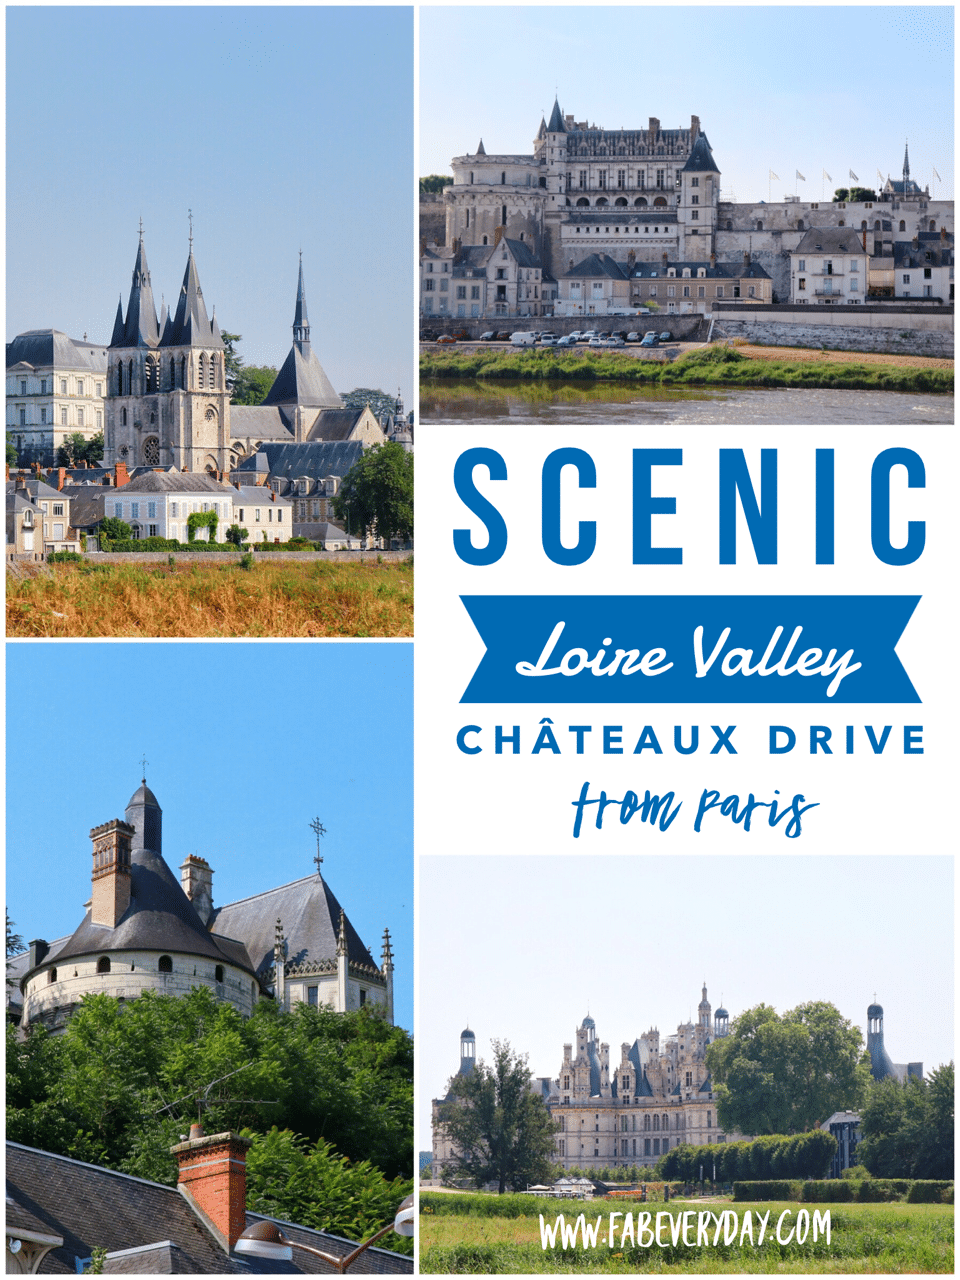 Scenic Loire Valley Chateaux Driving Route from Paris to Amboise